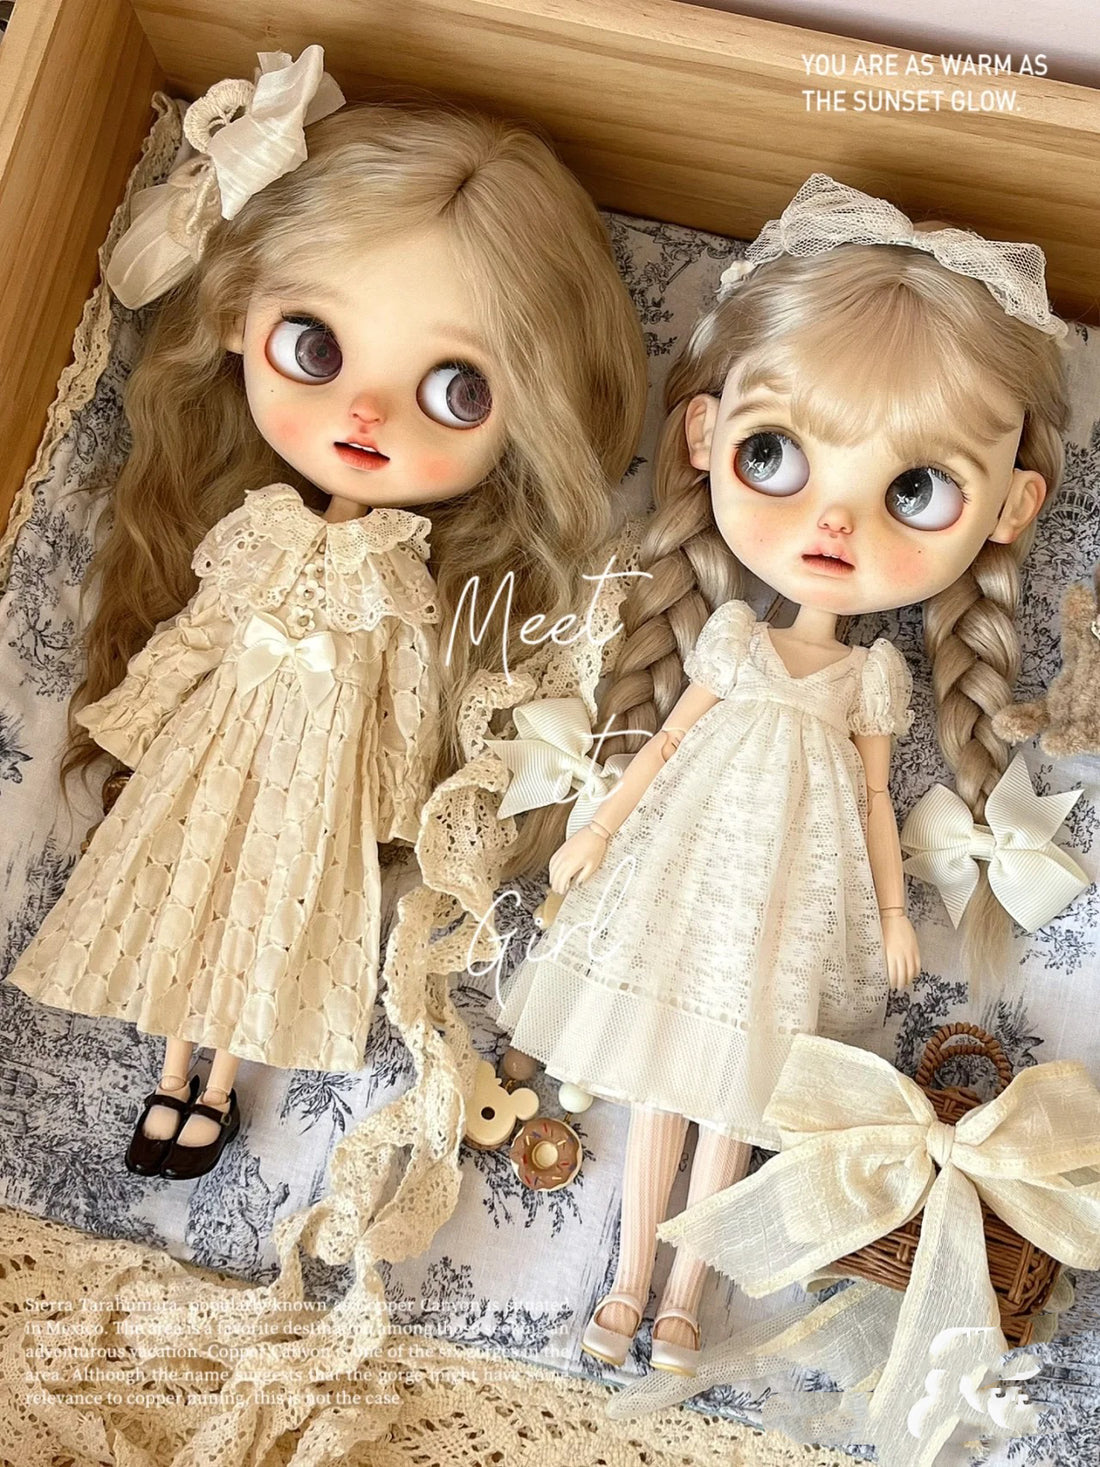 What do you need to customize a Blythe doll?